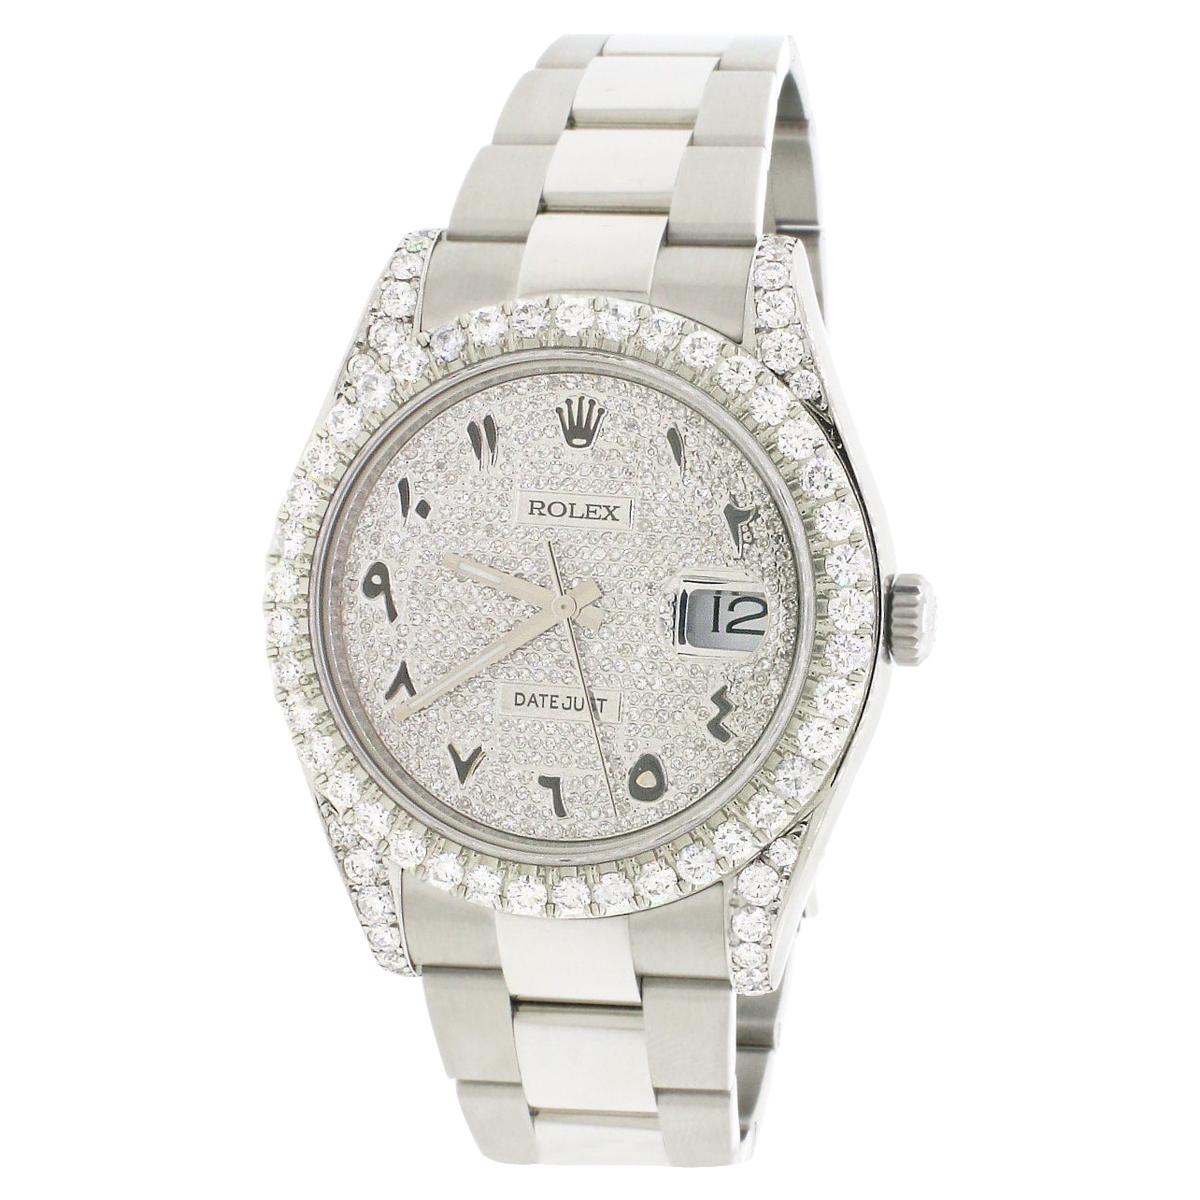 Rolex Datejust II Pave Dial Steel Watch 116300 with 5.57 Diamonds Box and Papers For Sale